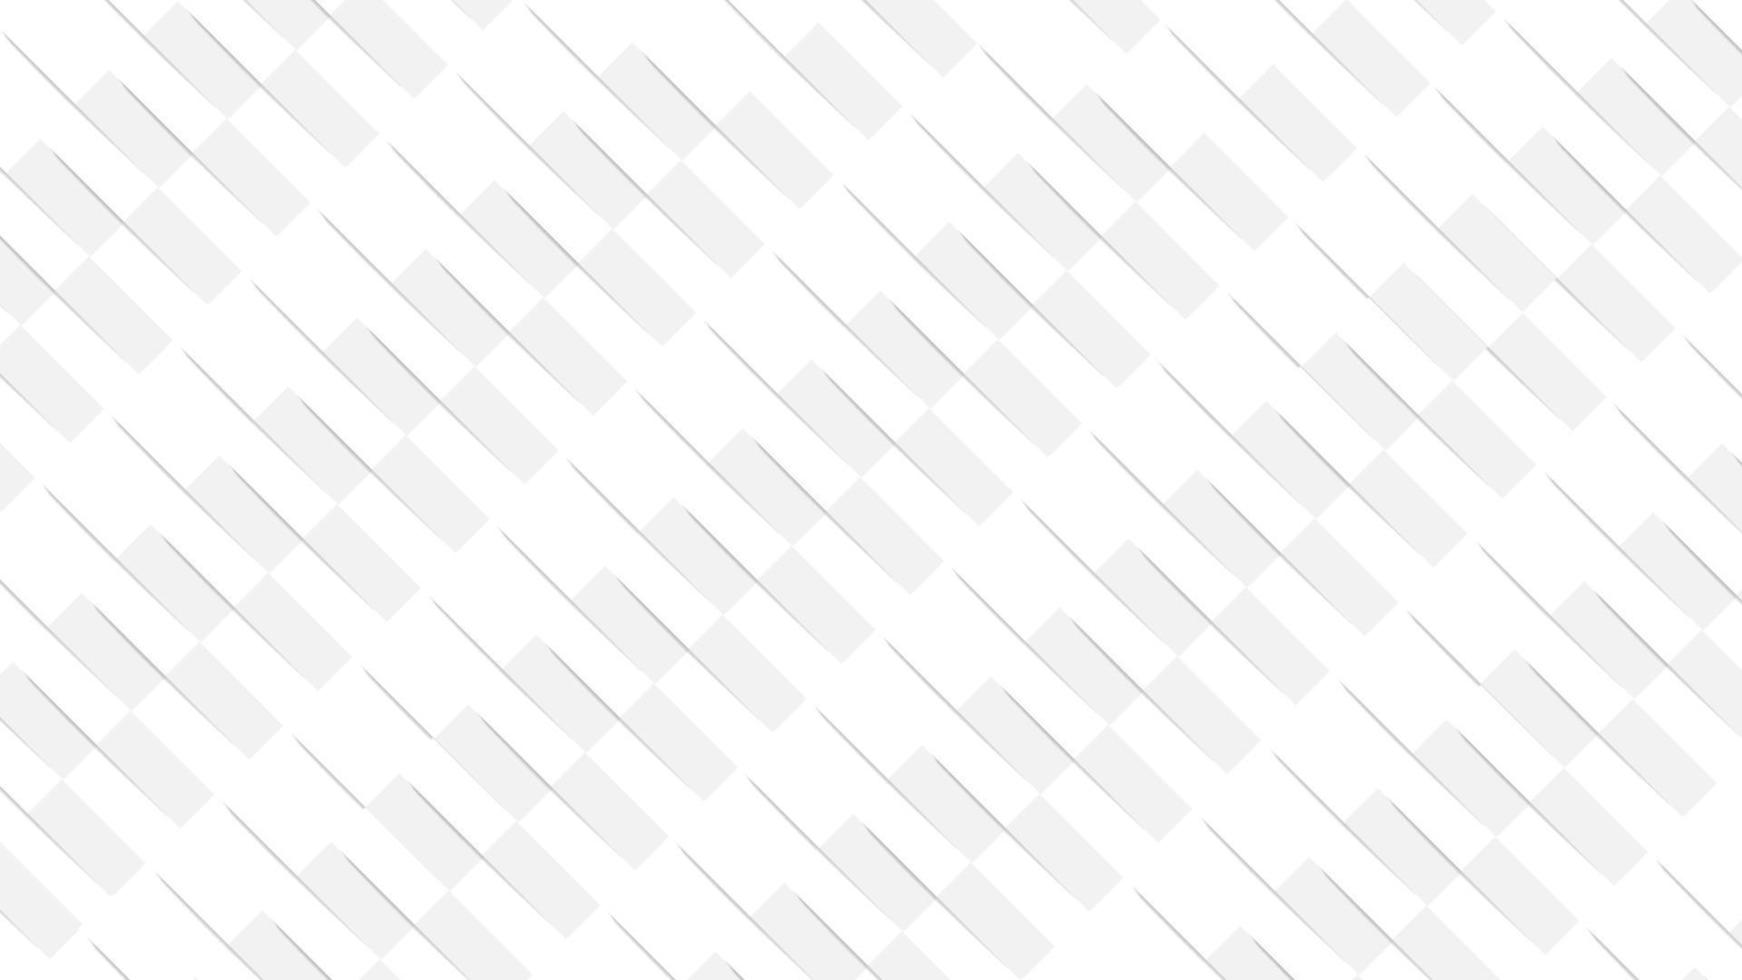 Abstract diagonal lines white backround vector